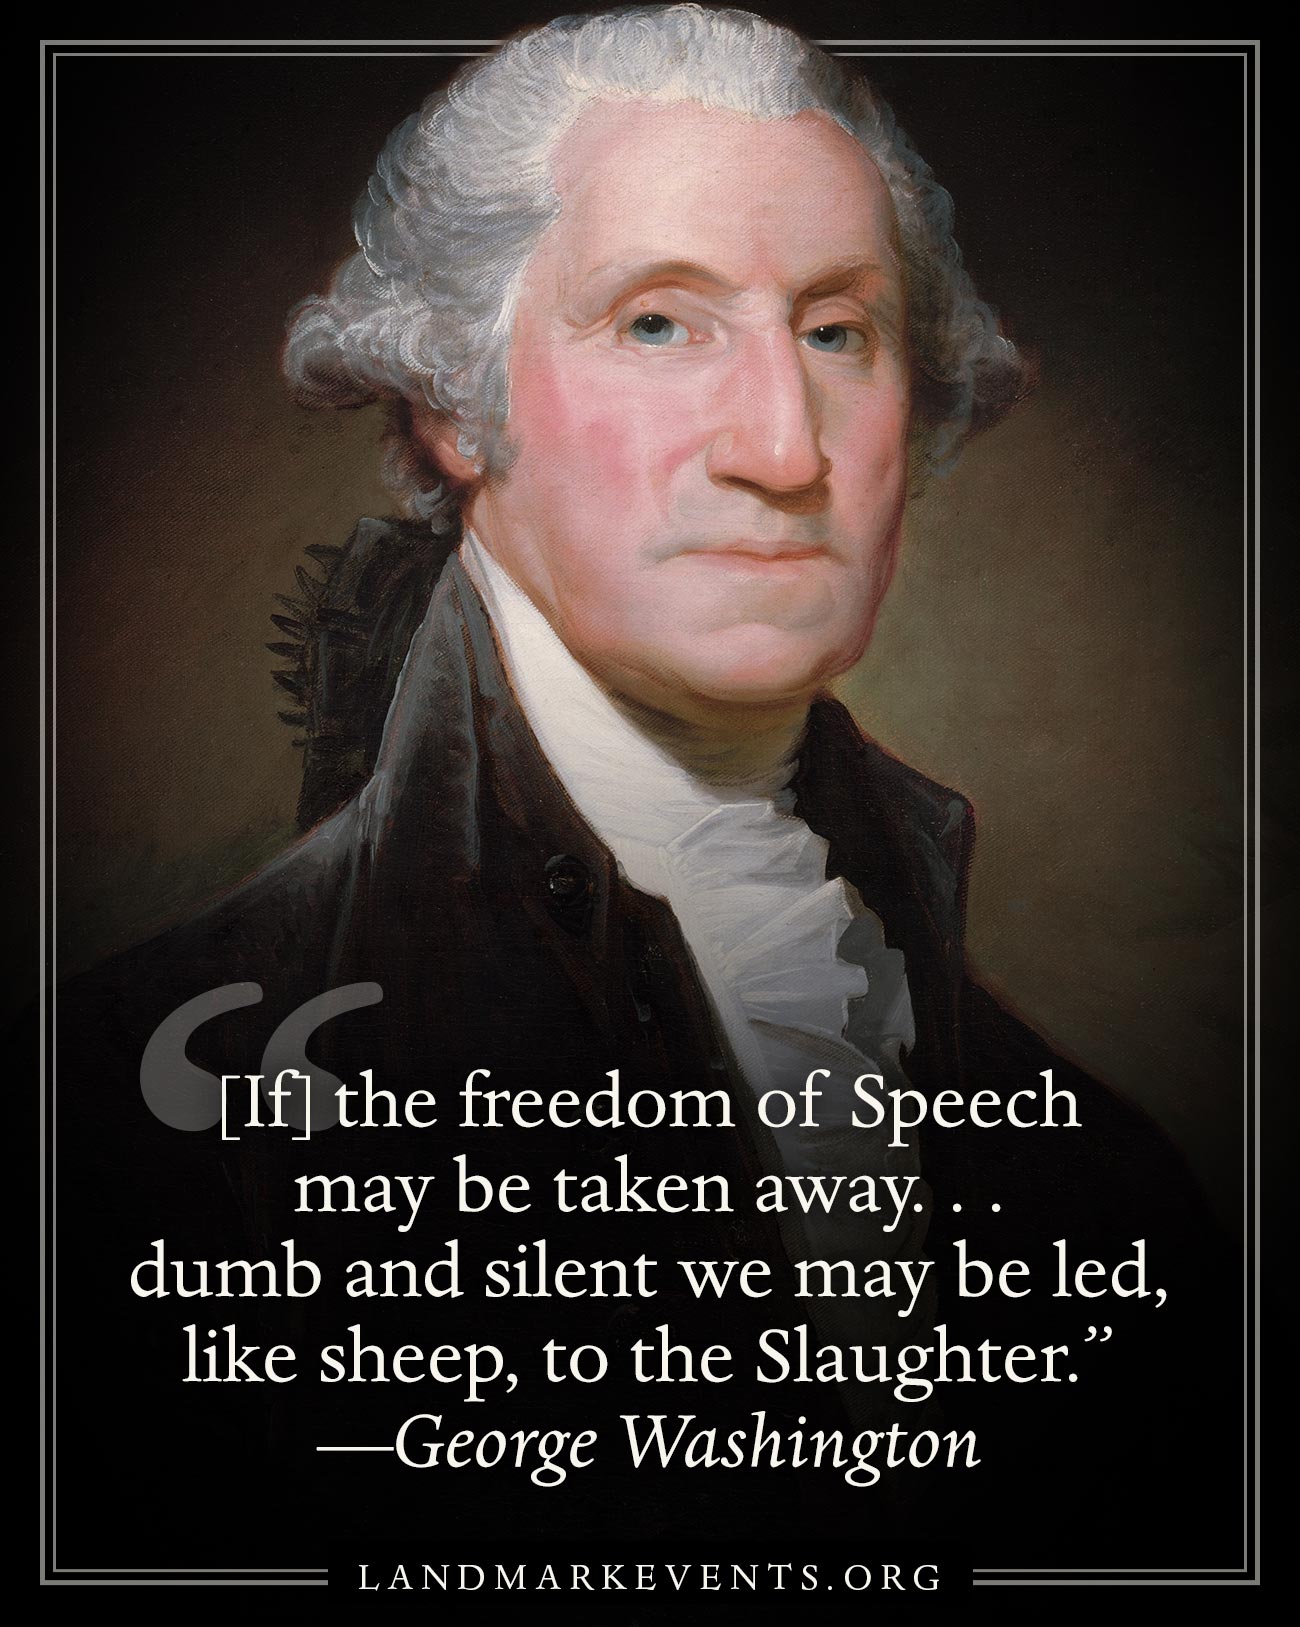 Voices from the Past - George Washington on Freedom of Speech